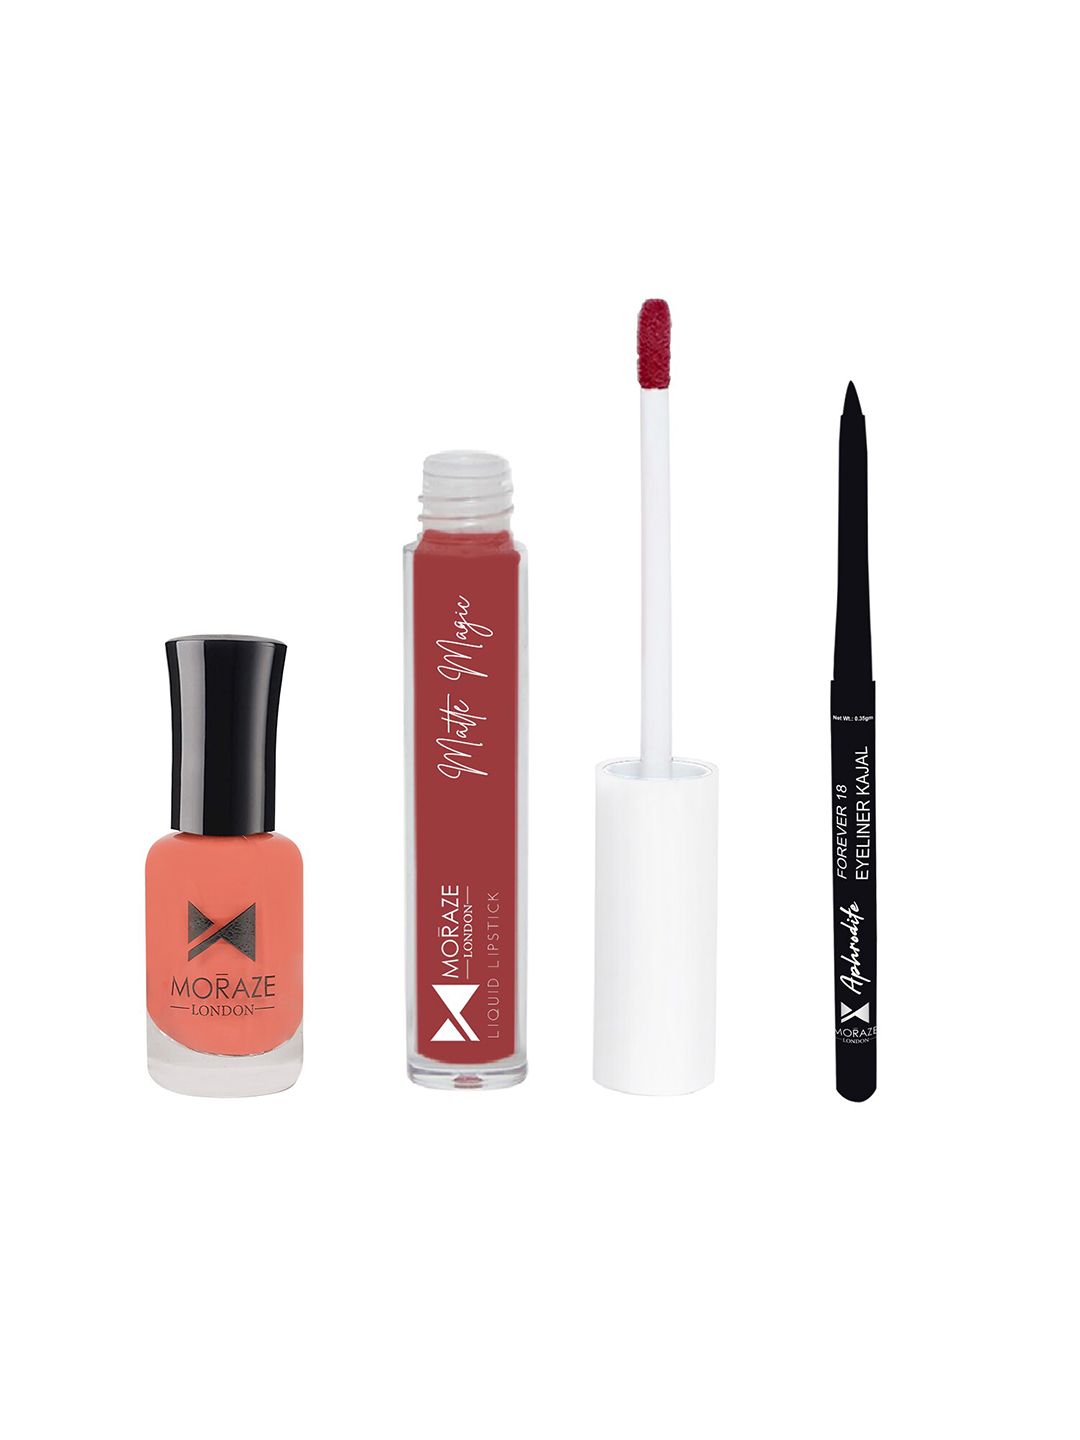 Moraze Nude Nail Polish (Tootsi) With 1 Lipstick (Sorry) and 1 Kajal Combo Pack Price in India